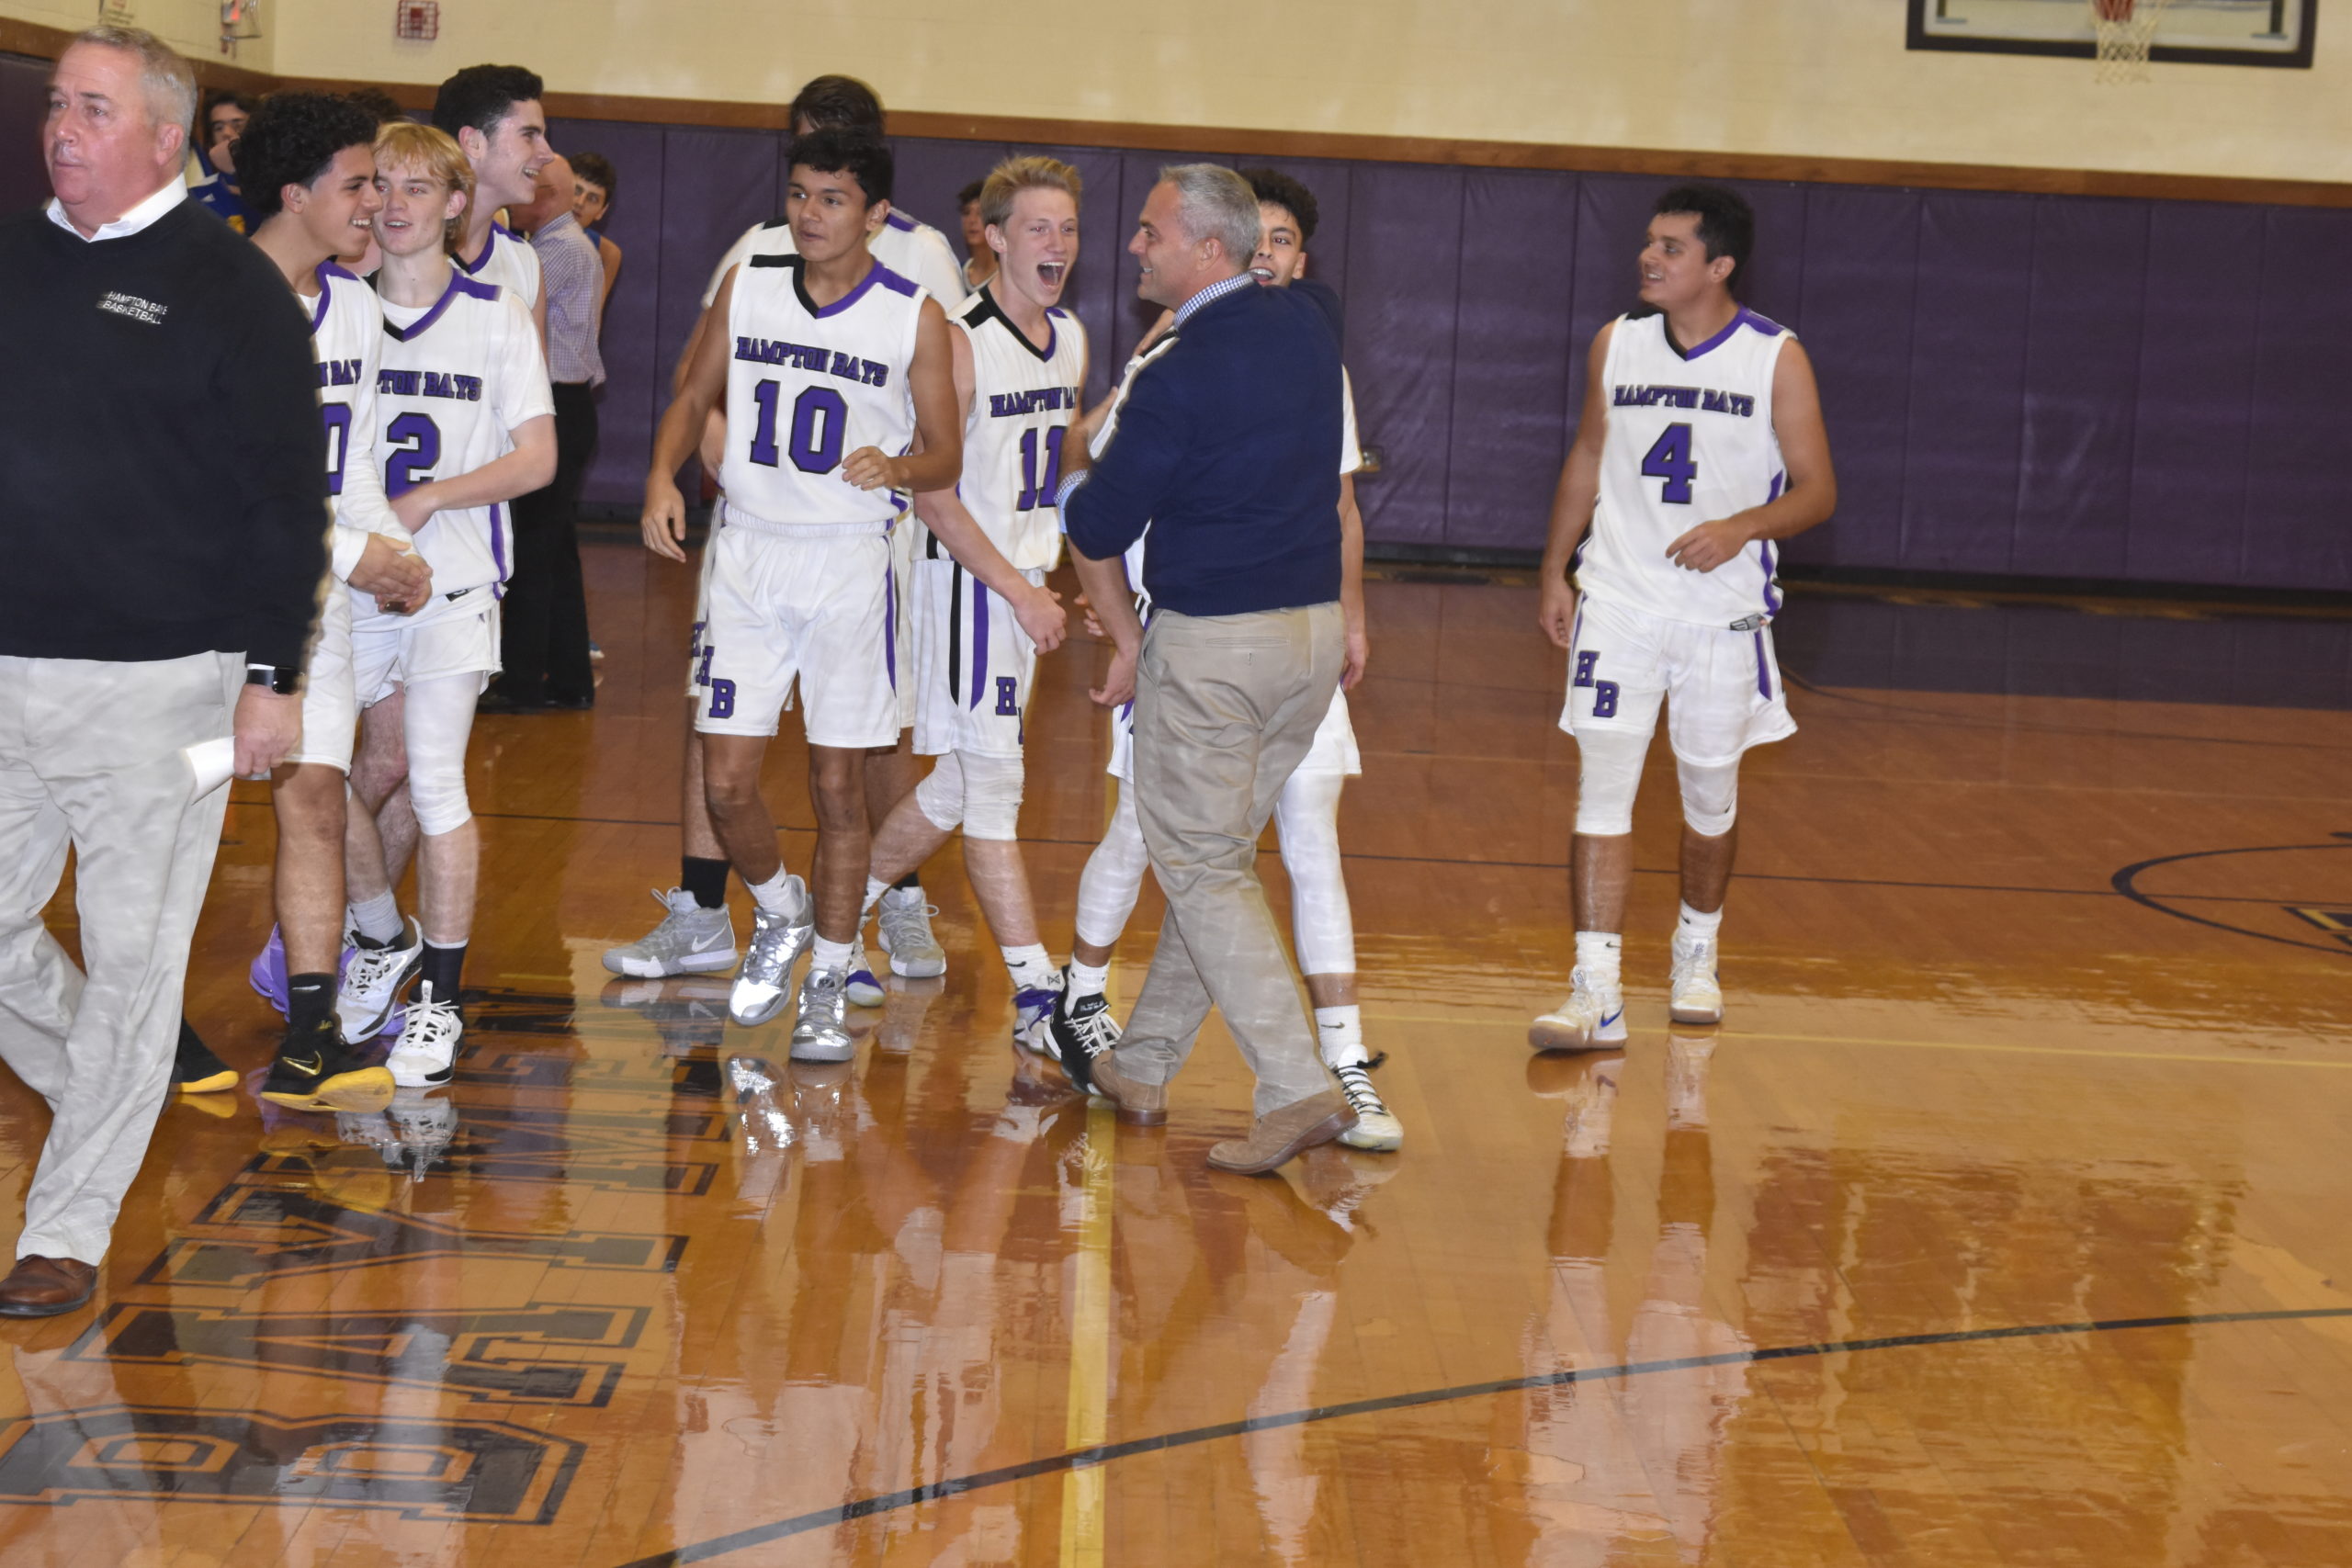 Assistant coach John Paga and teammates congratulate Steven Mora after his half-court buzzer beater led to a 54-51 victory over West Islip on Friday night.